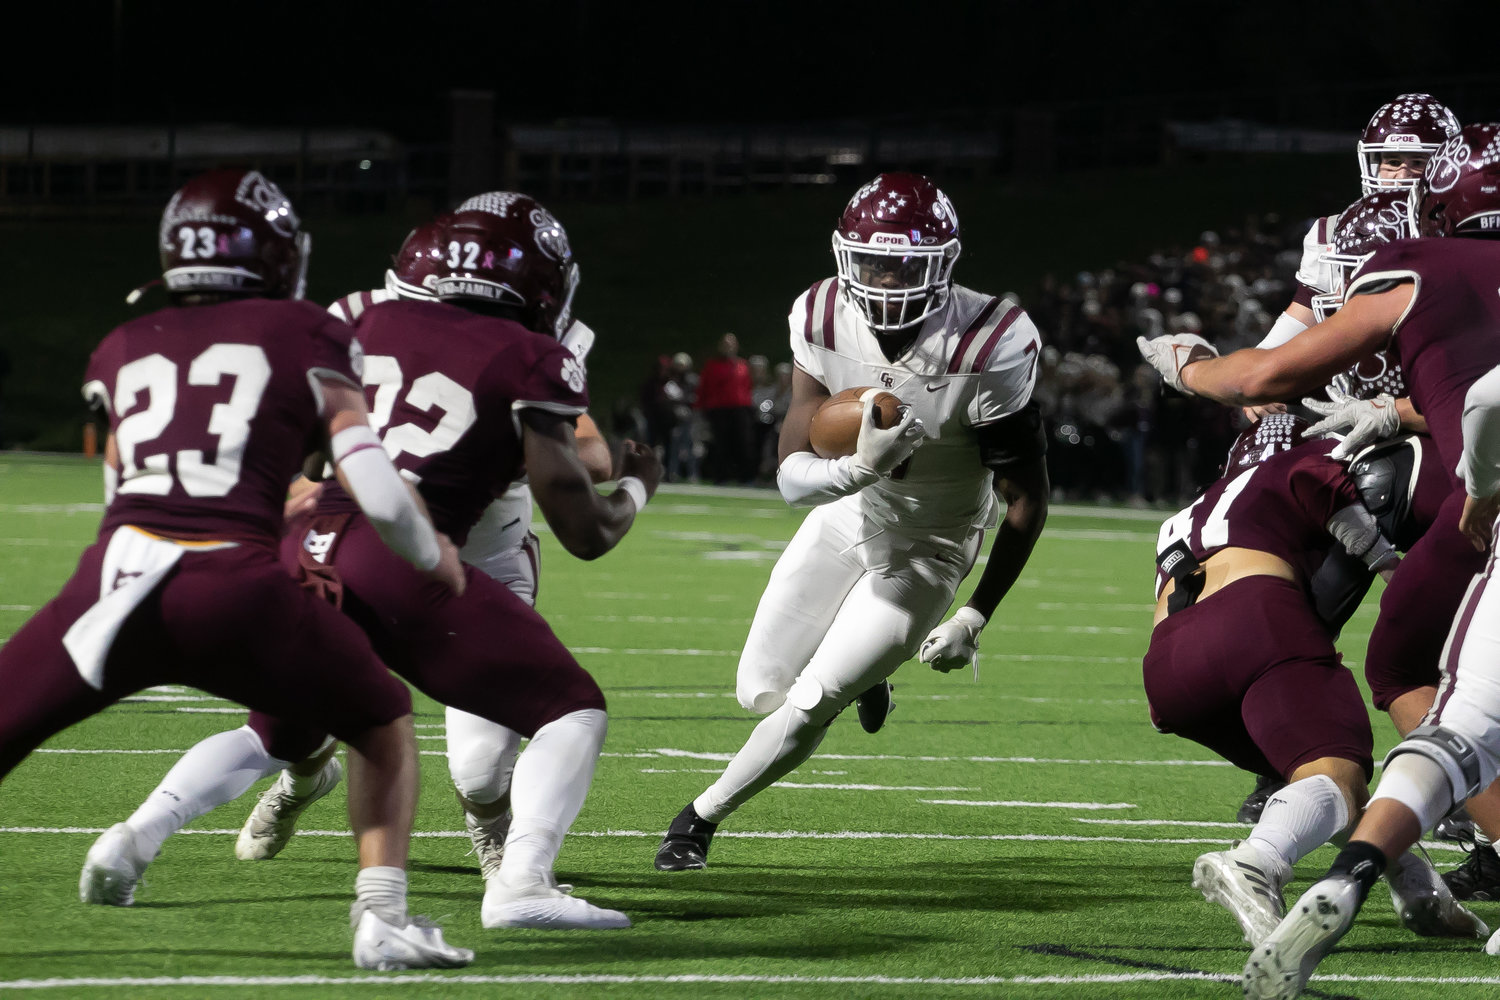 Sam McKnight cuts upfield during Friday's Class 6A-Division I area round game between Cinco Ranch and Cy-Fair at Pridgeon Stadium.